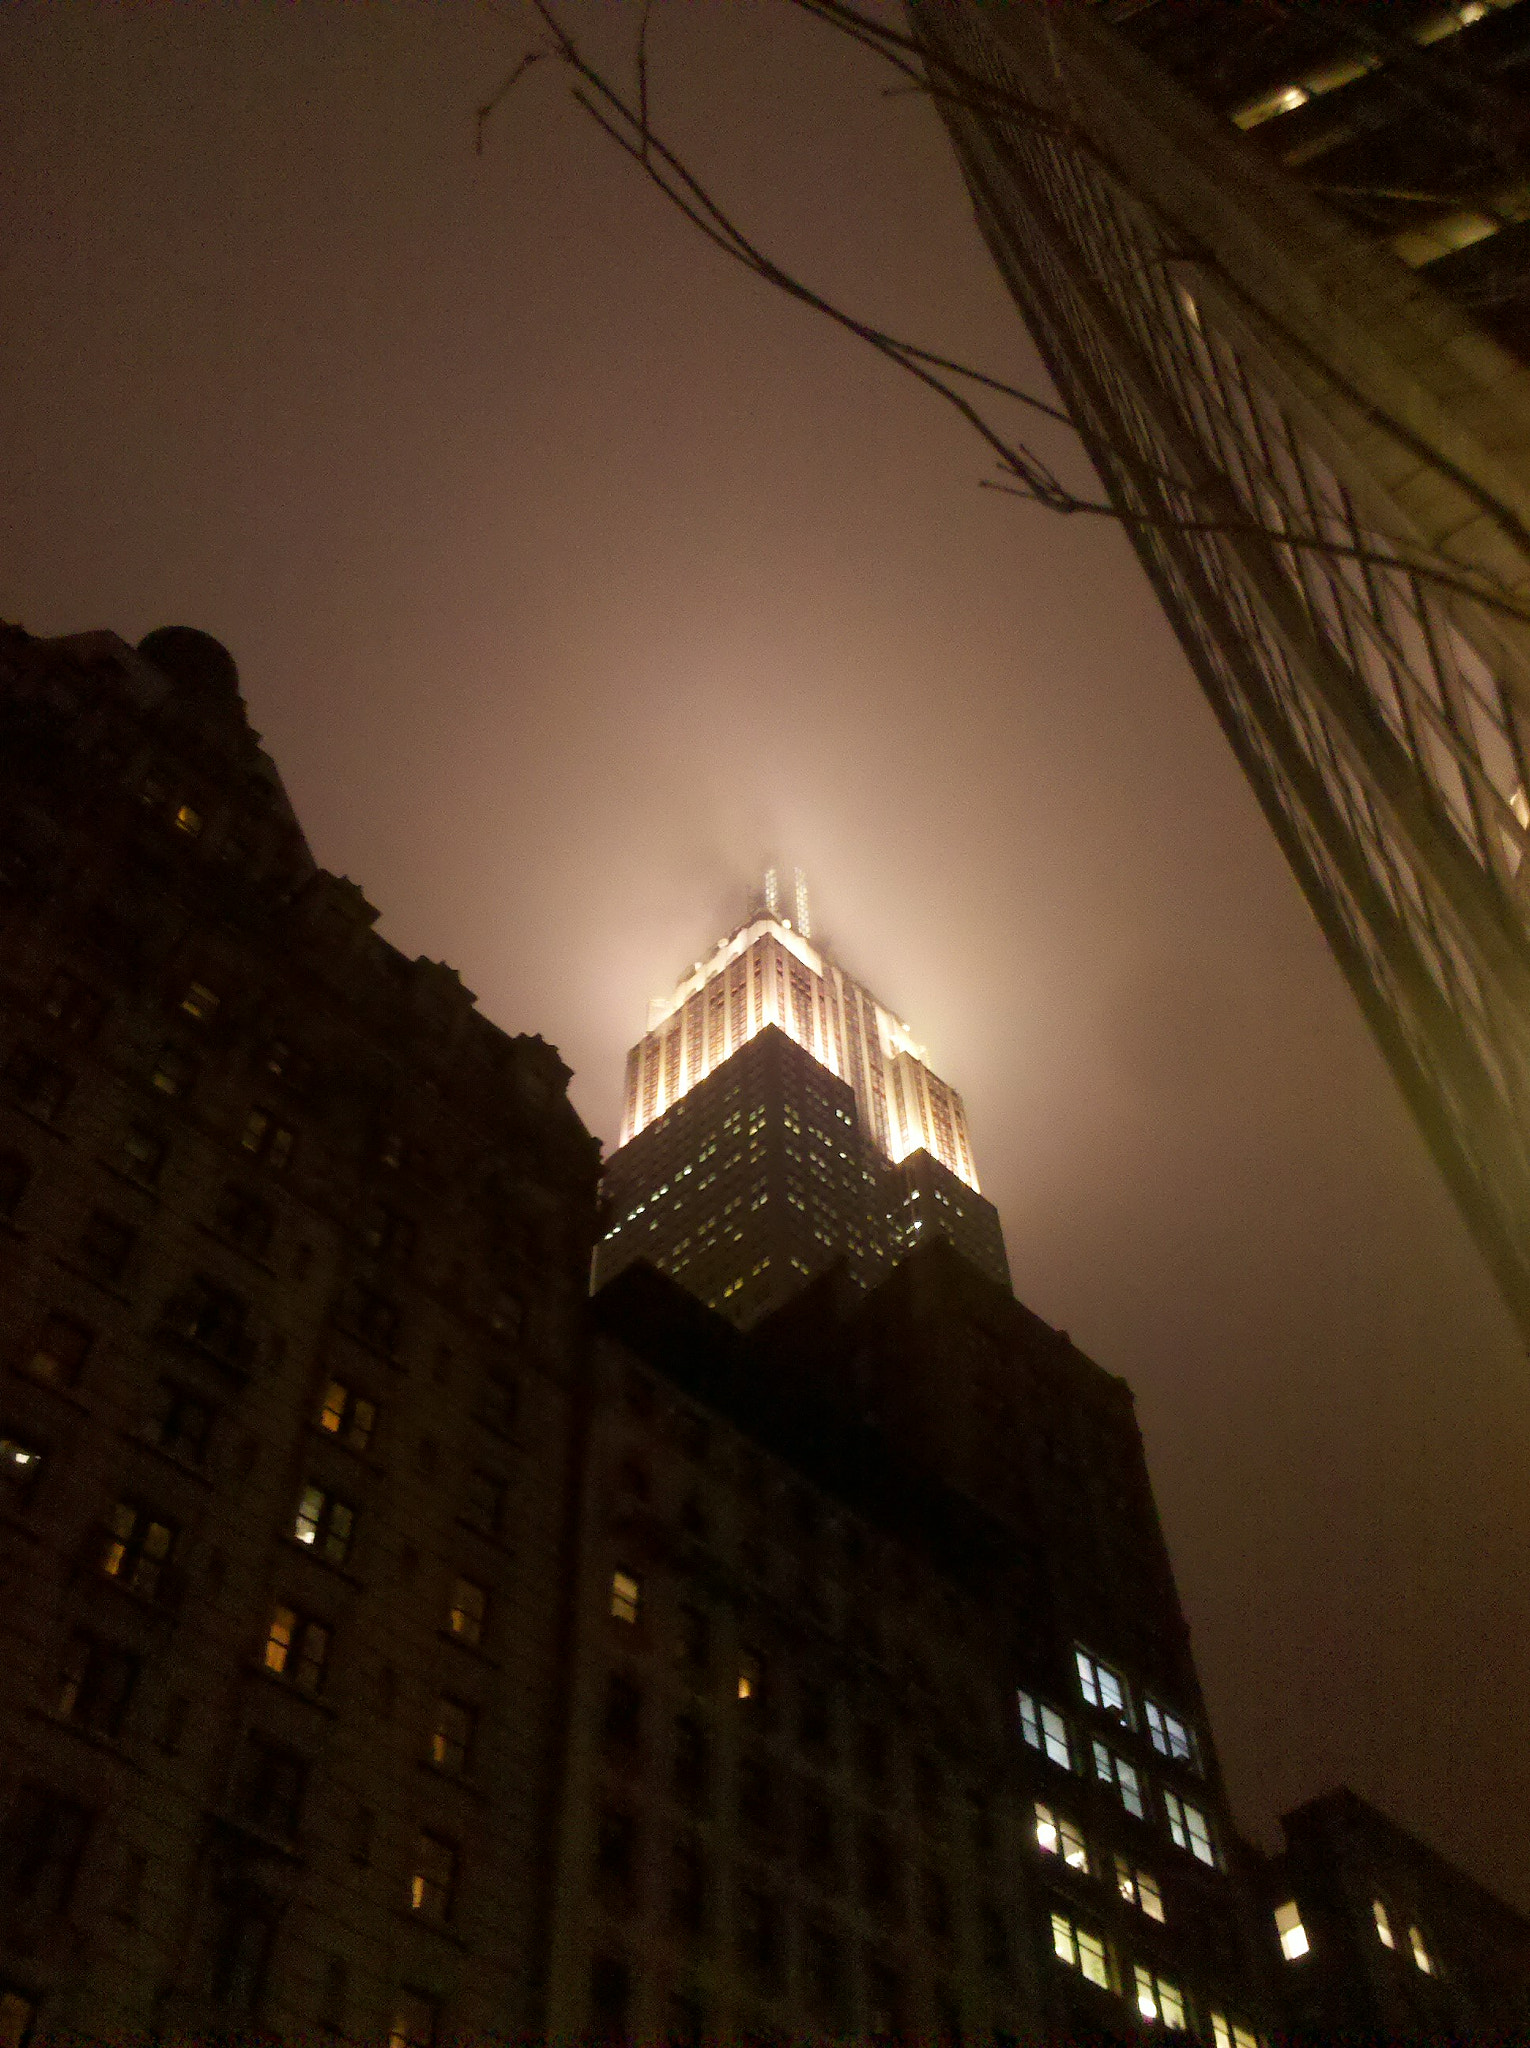 Motorola Droid sample photo. Empire state building in fog photography